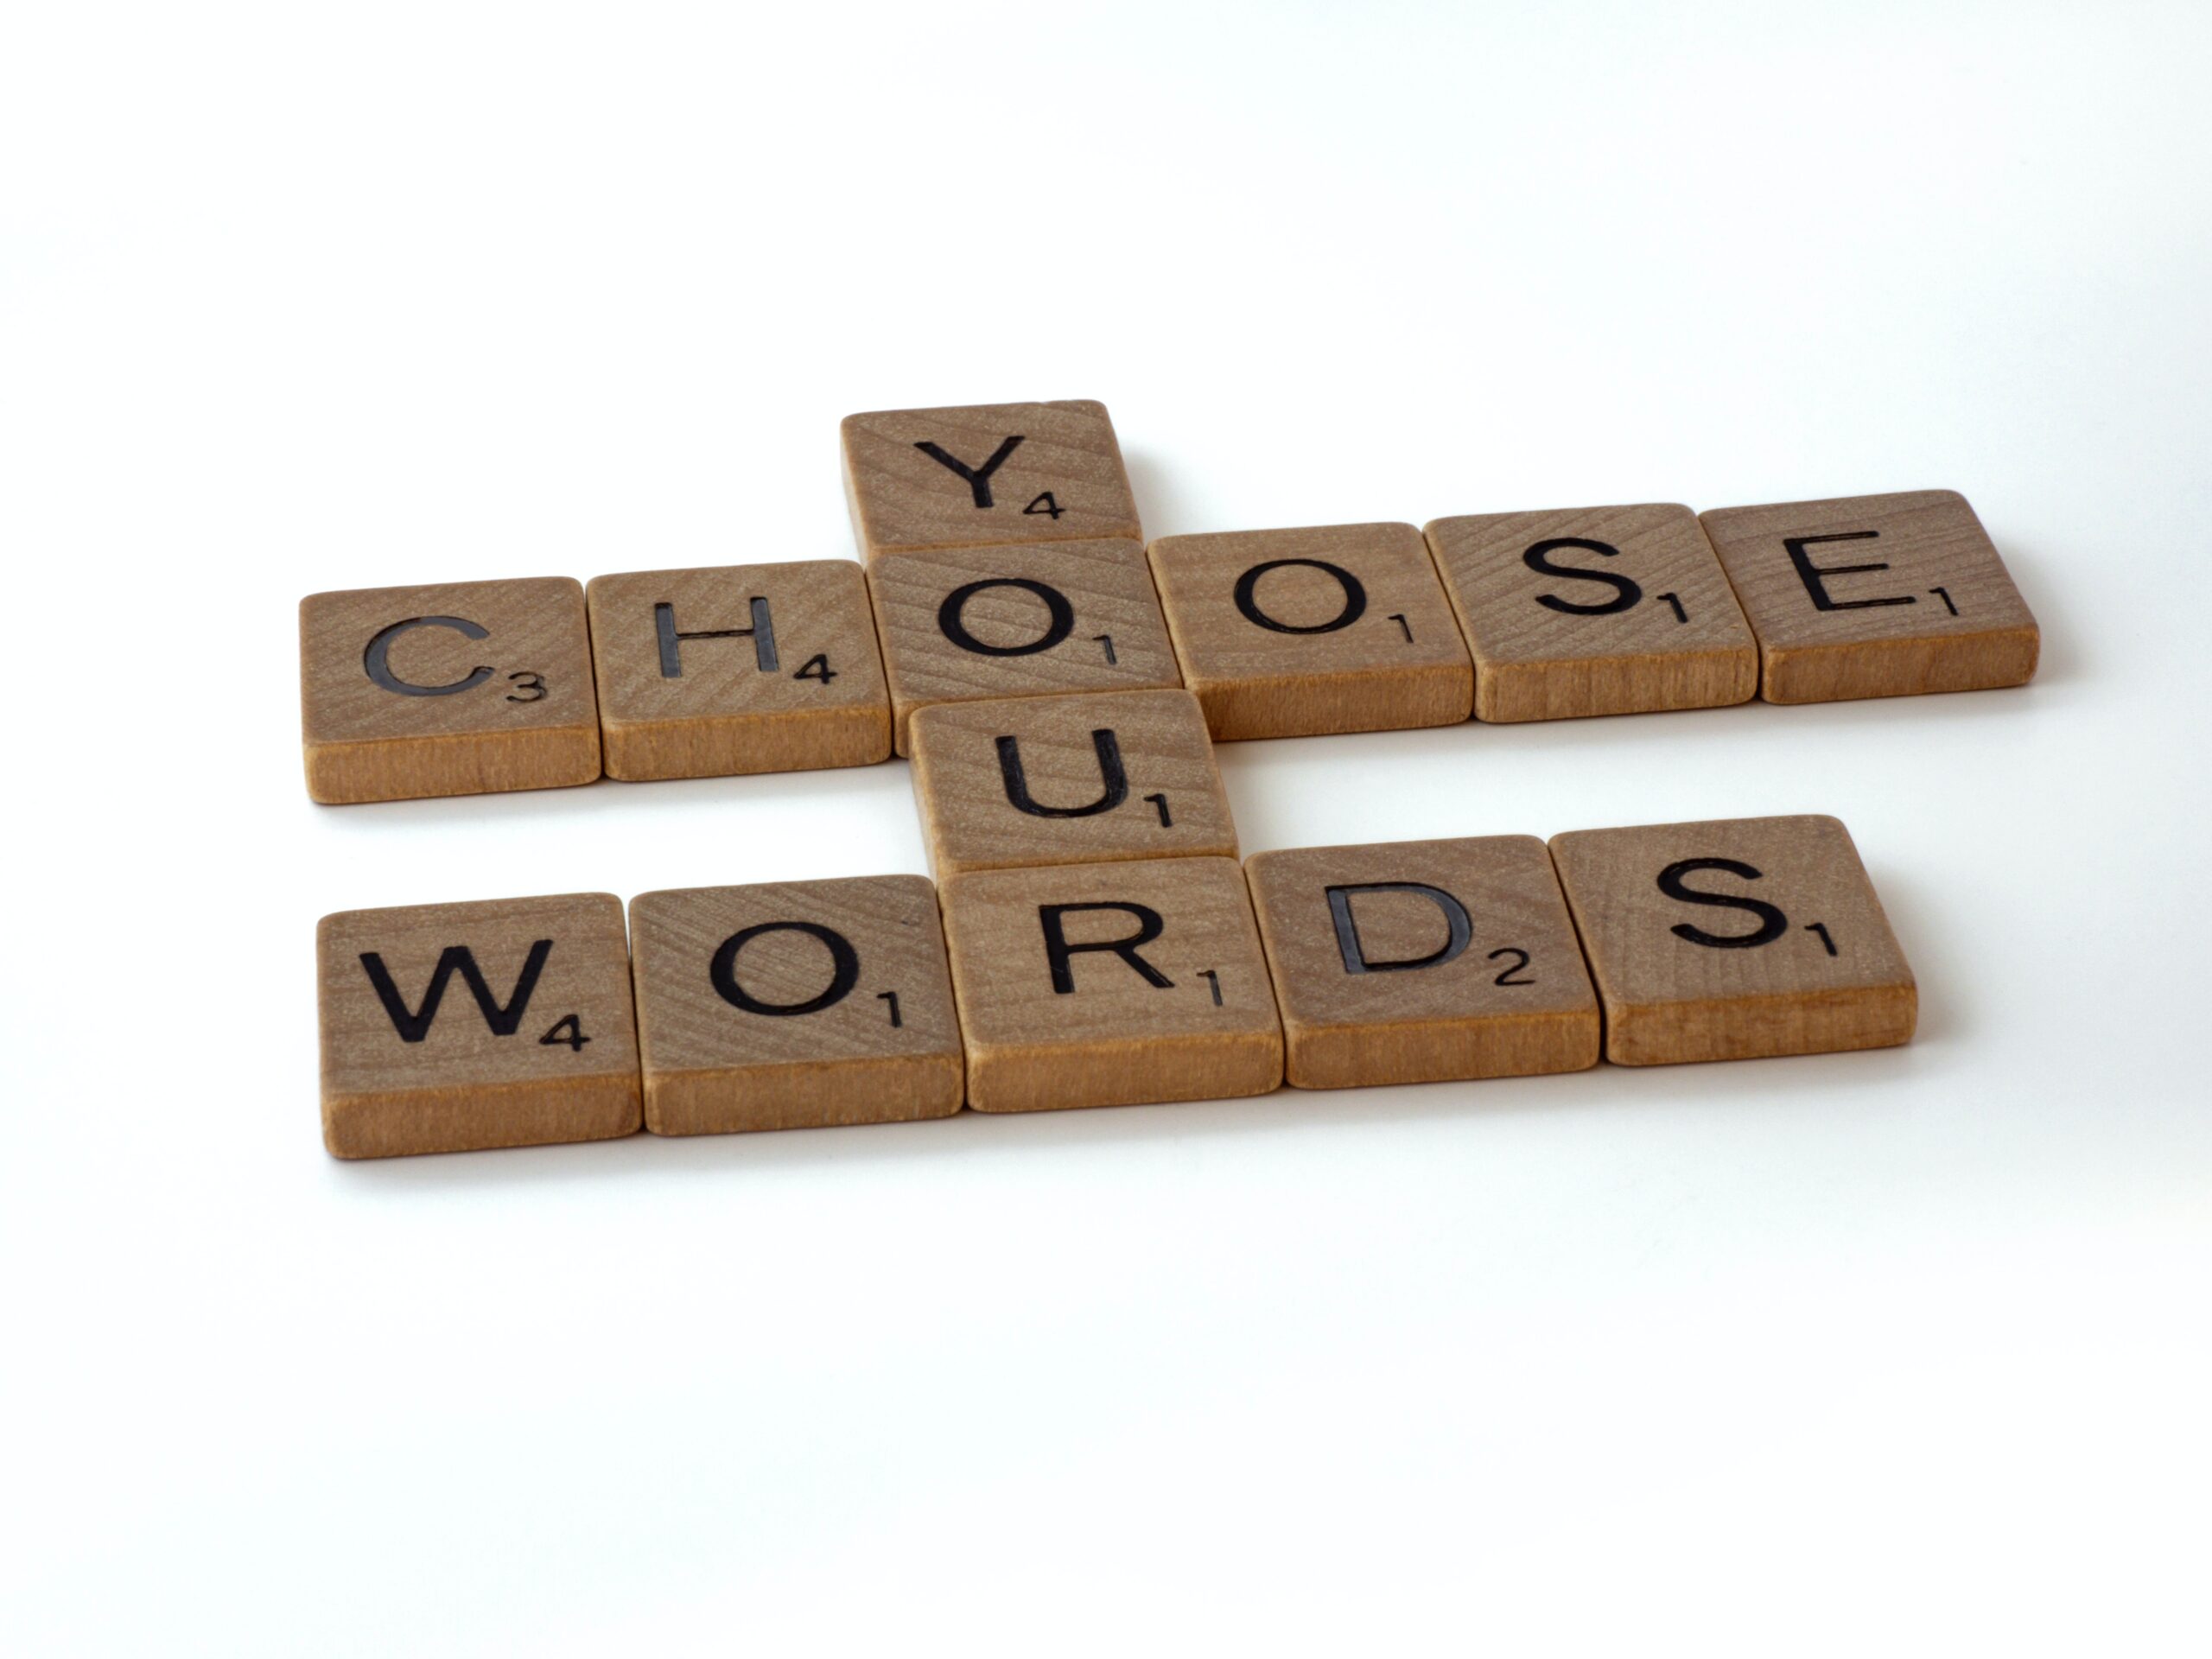 choose your words wisely and use positive language